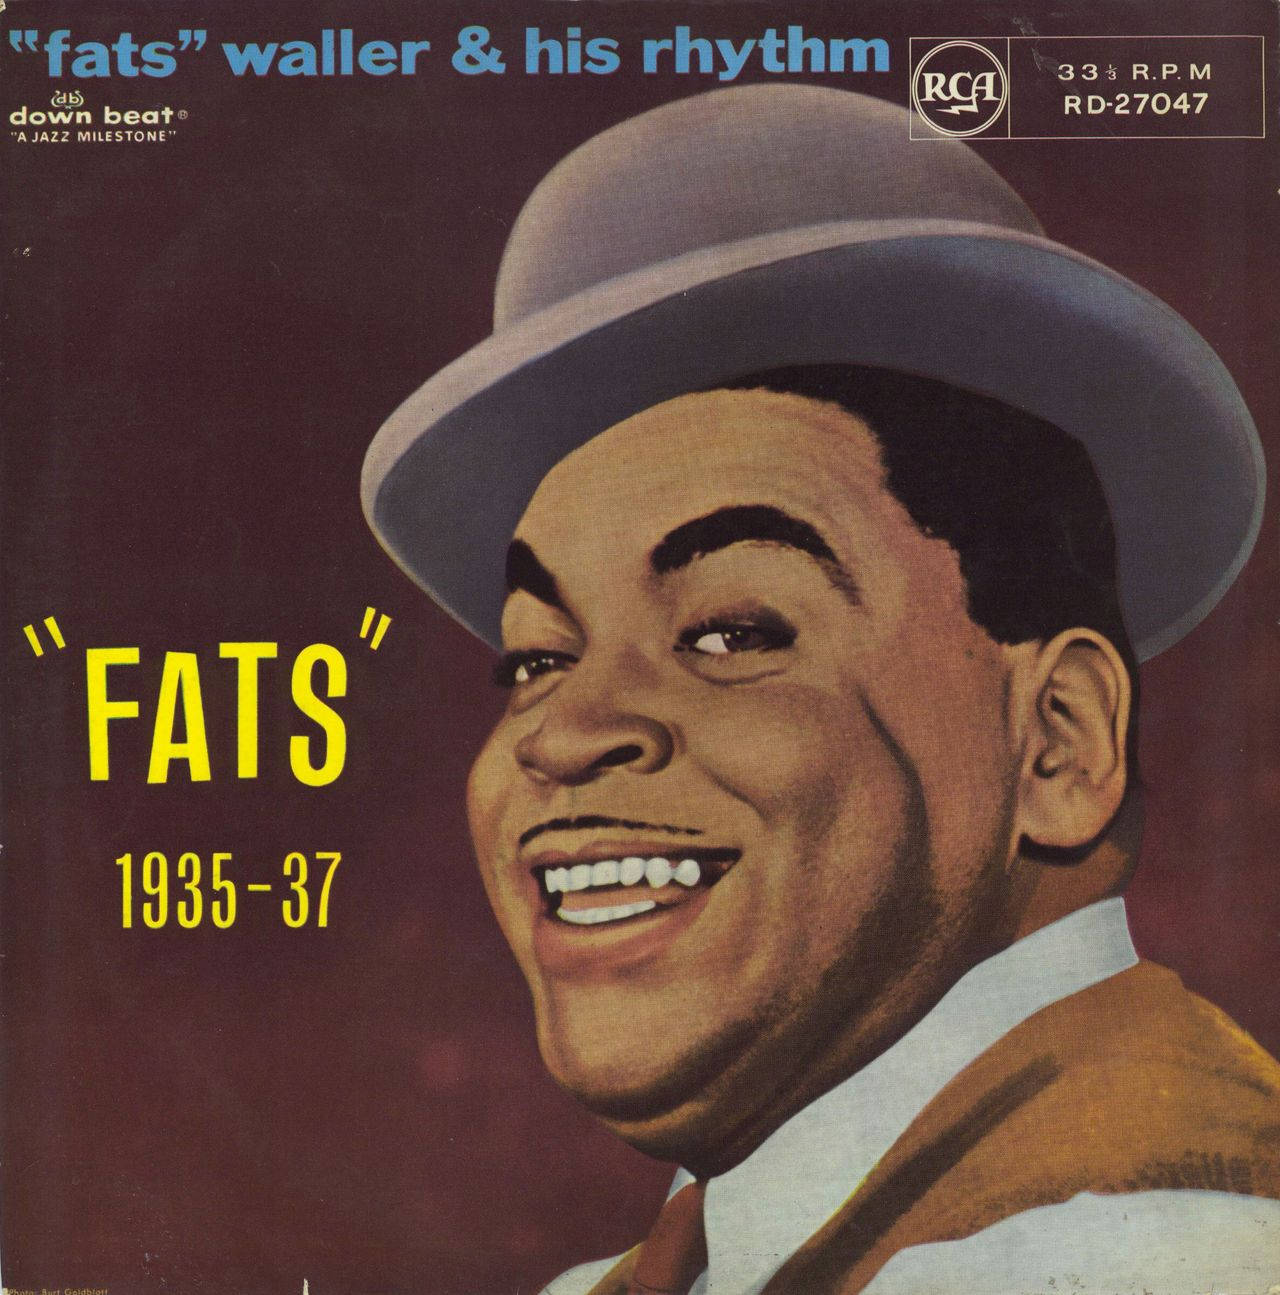 Fats Waller And His Rhythm 1935 To 1937 Wallpaper